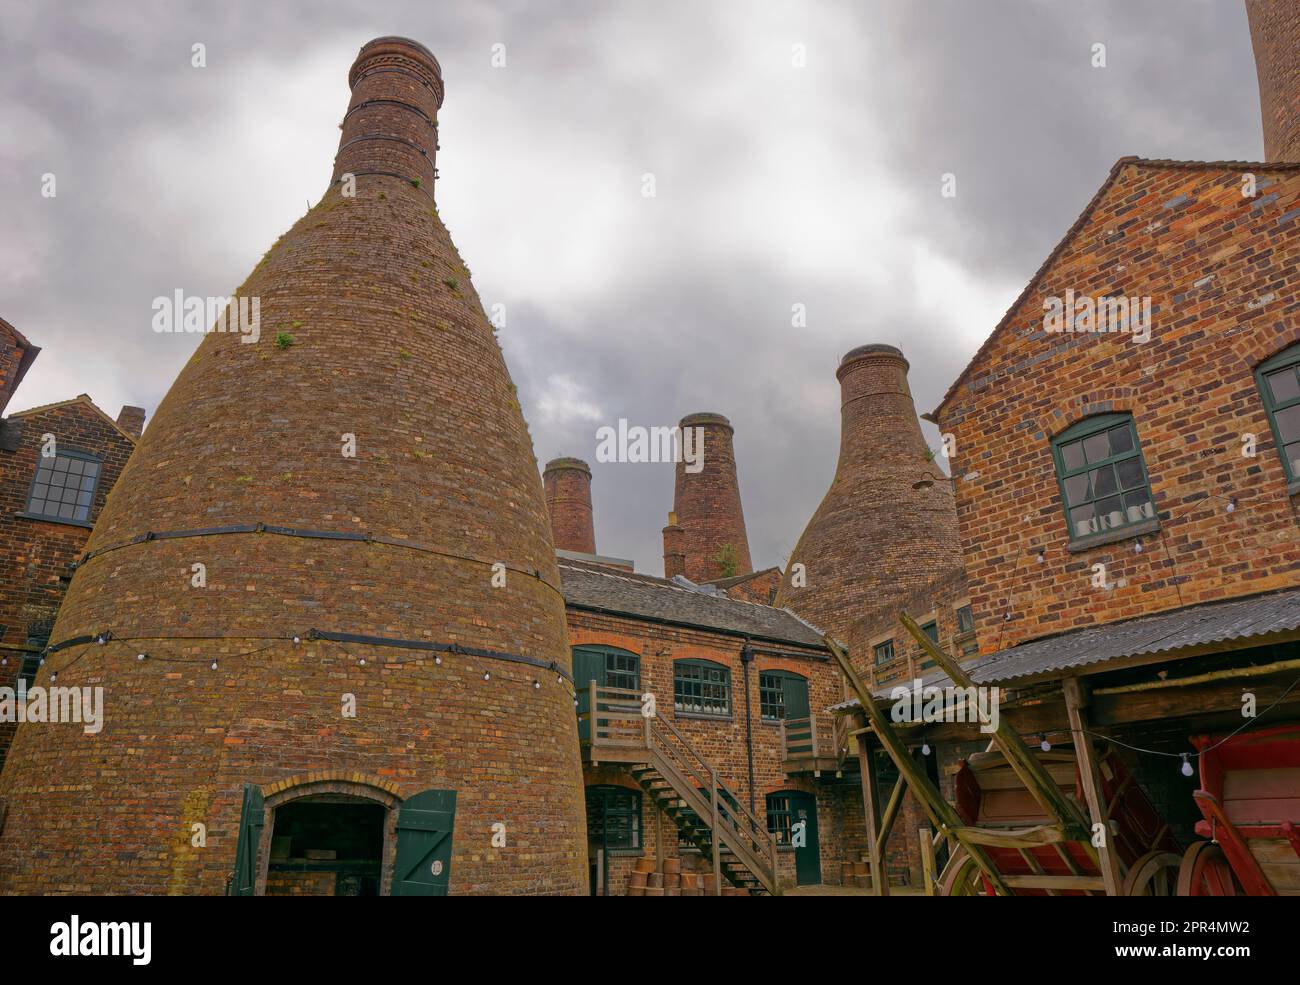 The Gladstone Pottery Museum with it's bottle kilns at Longton, Stoke-on-Trent in Staffordshire, England. Stock Photo